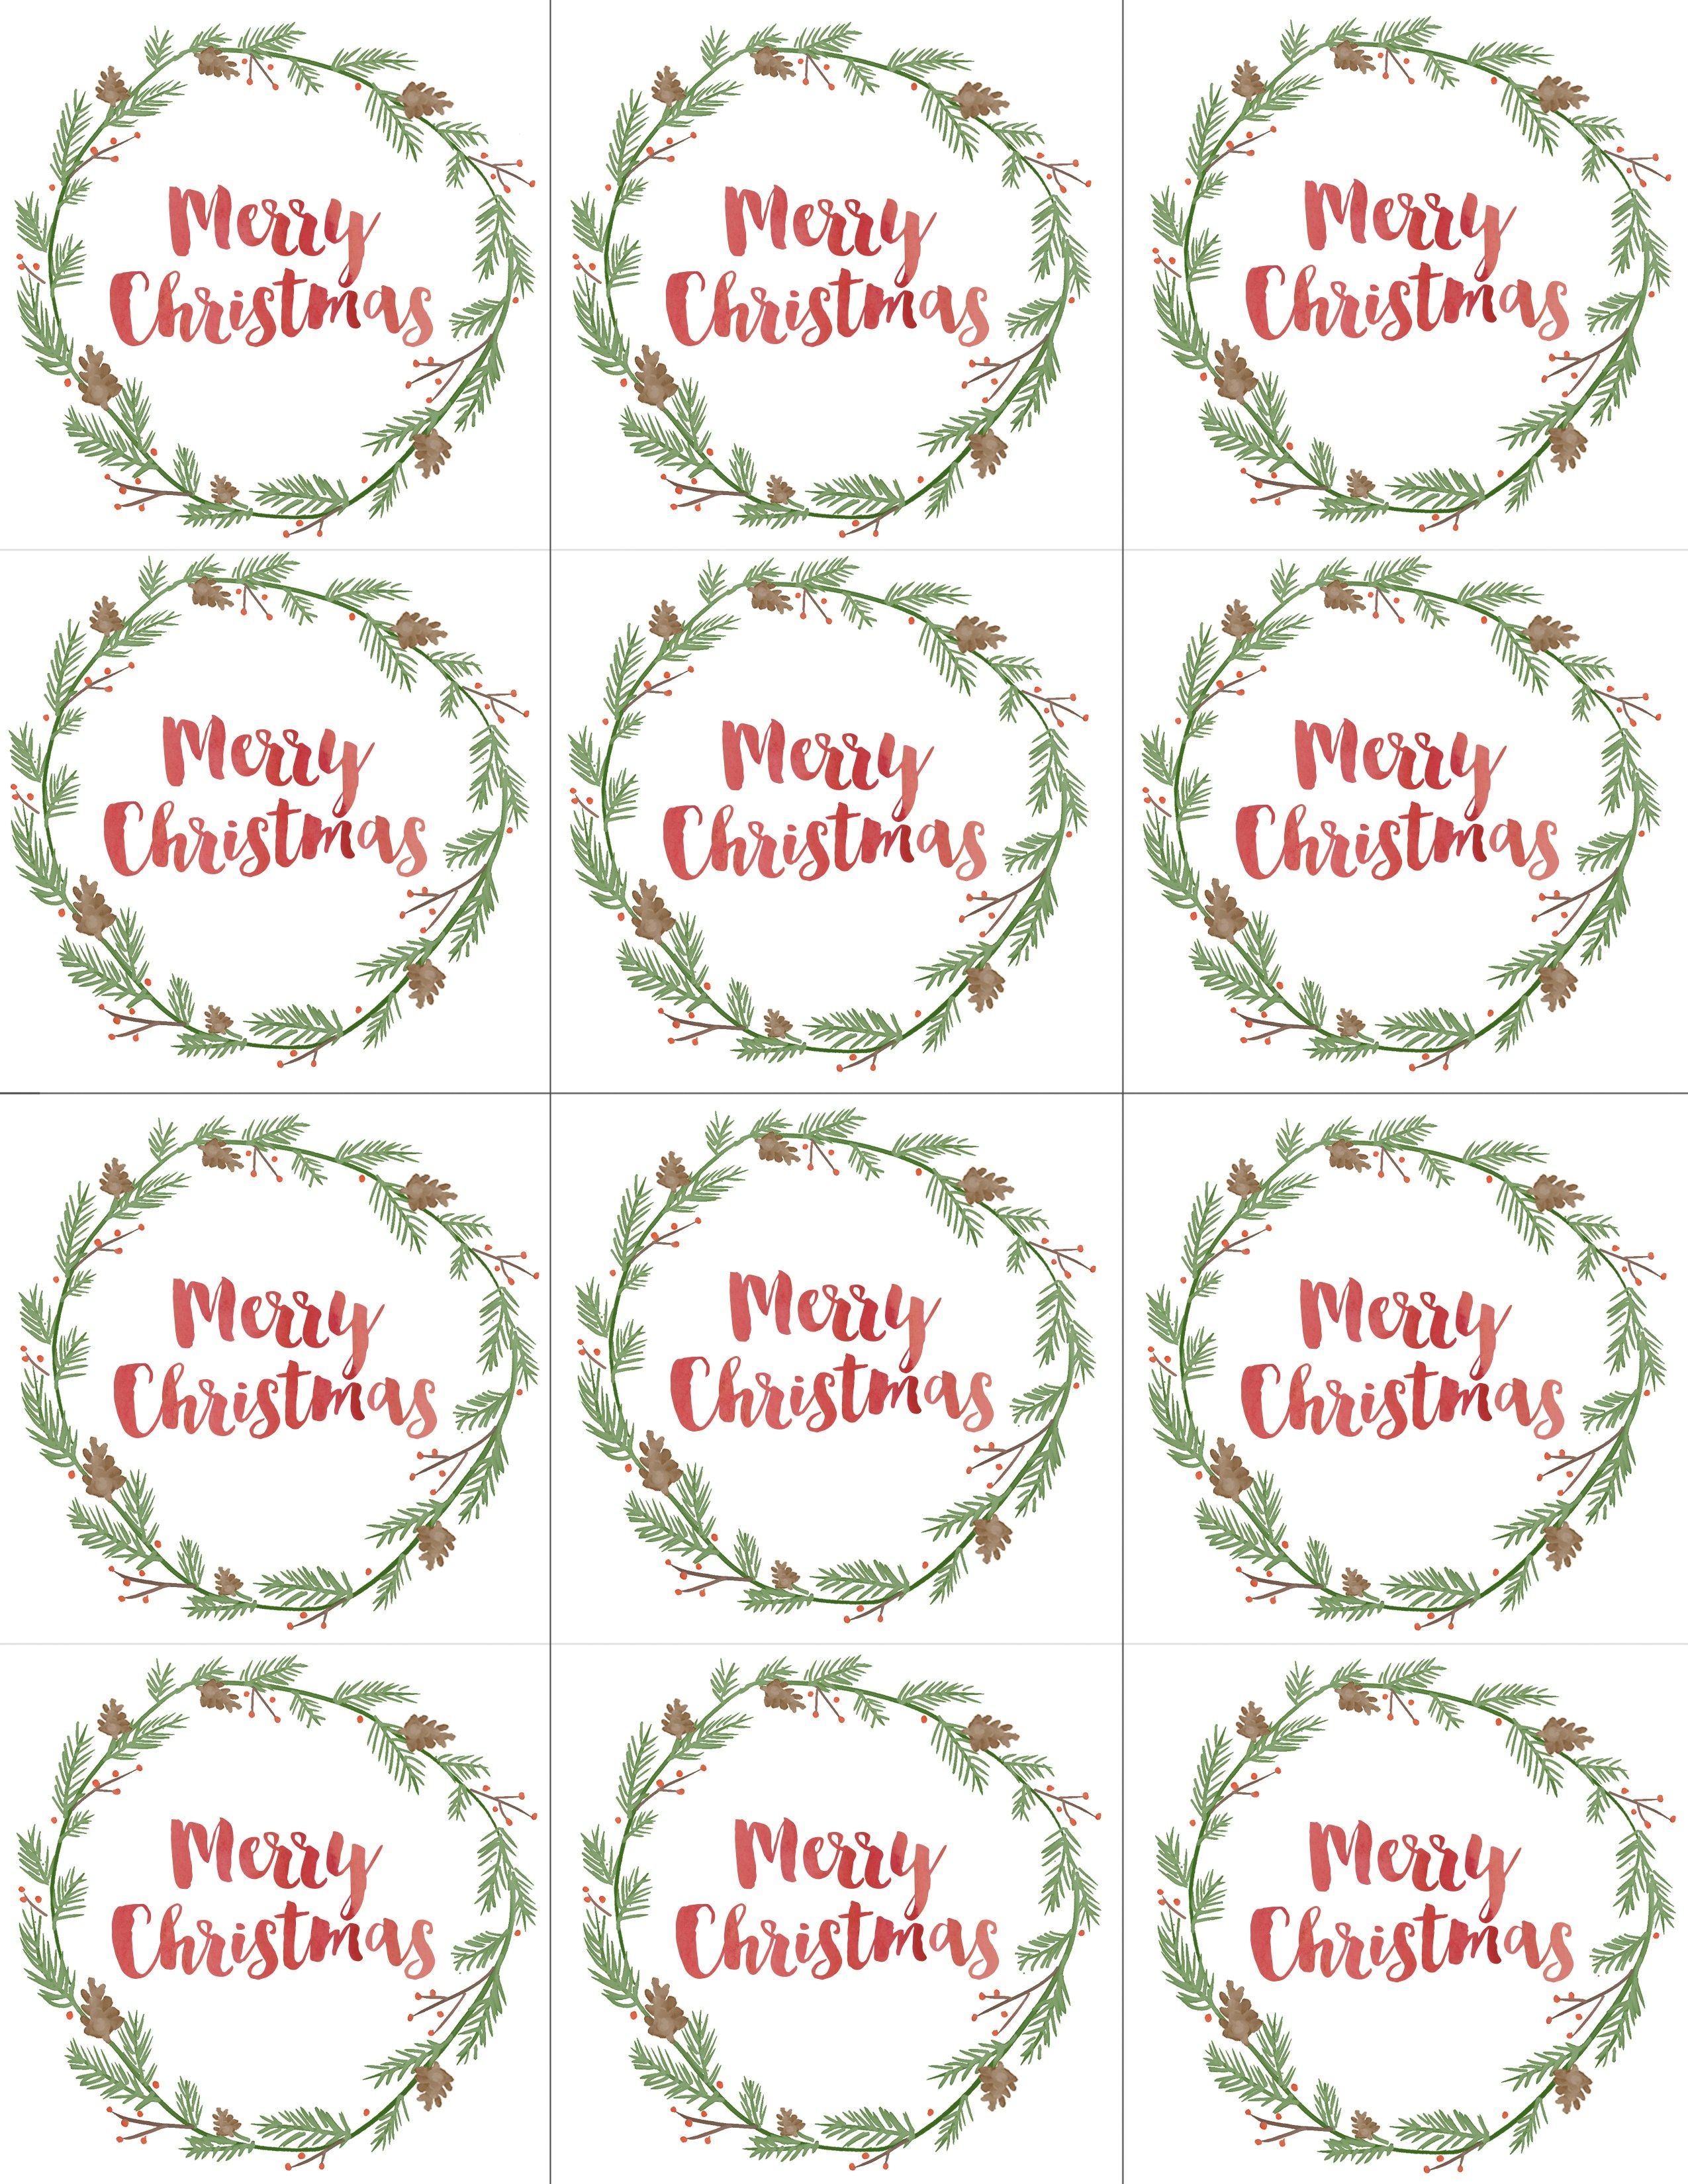 Hand Painted Gift Tags Free Printable | Christmas | Christmas Gift - Free Printable Personalized Christmas Invitations